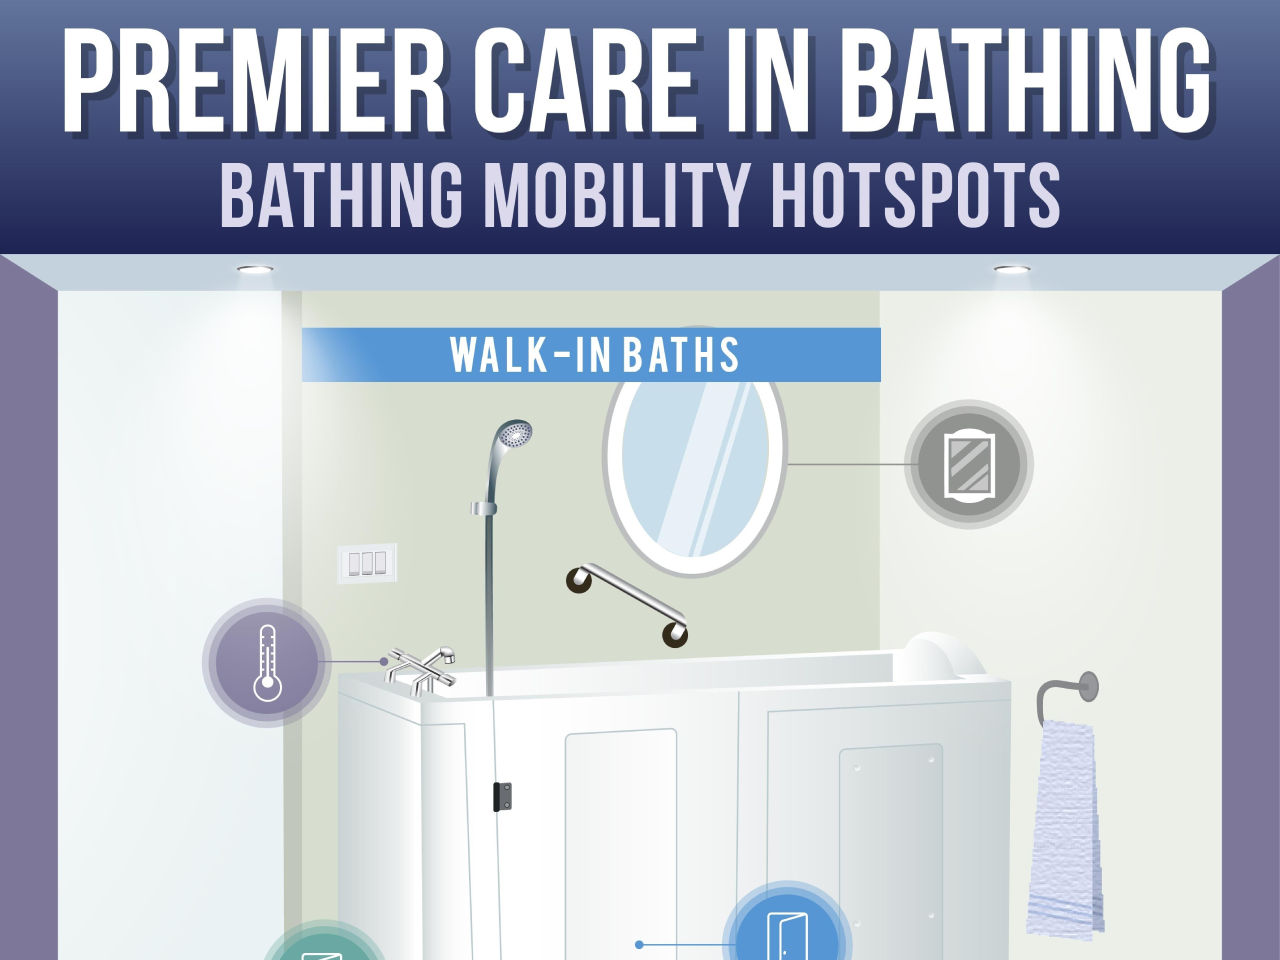 A History Of Bathing Mobility Hotspots [InfoGraphic]